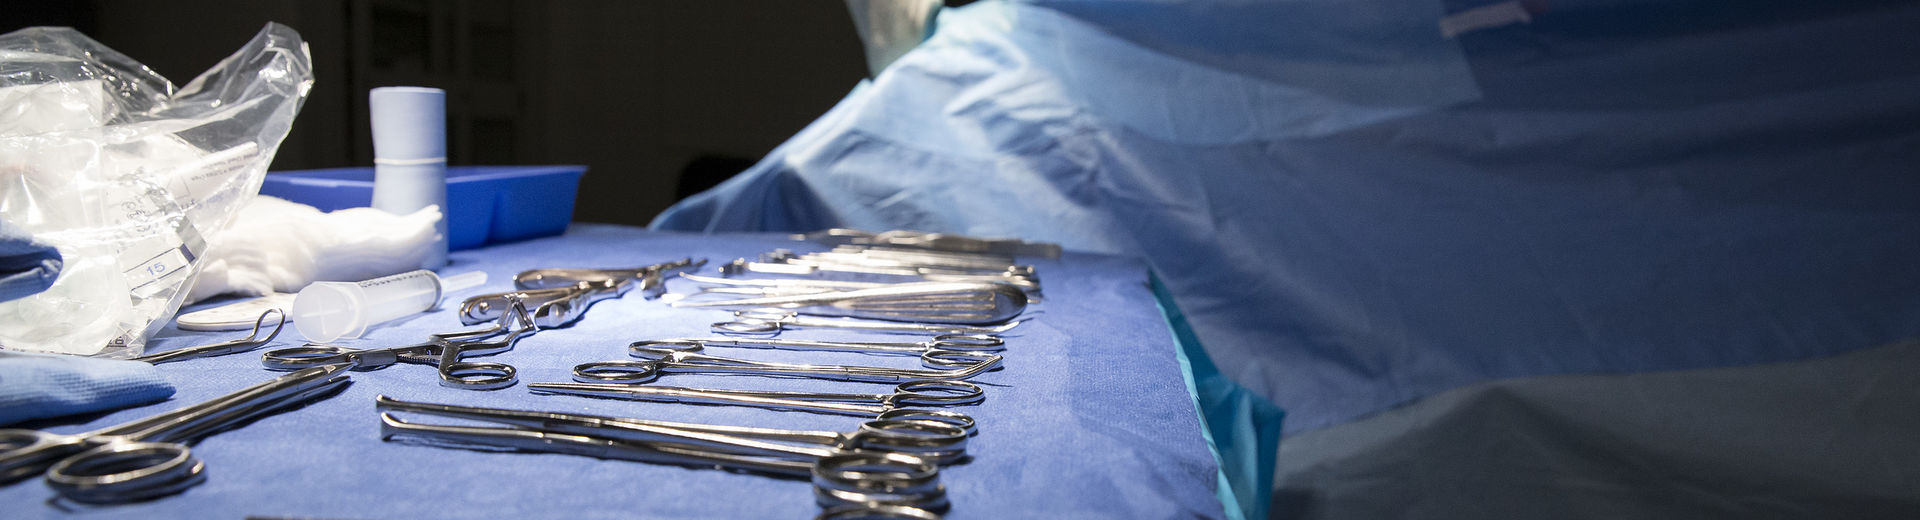 Podiatric surgical tools on a table in an operating room.